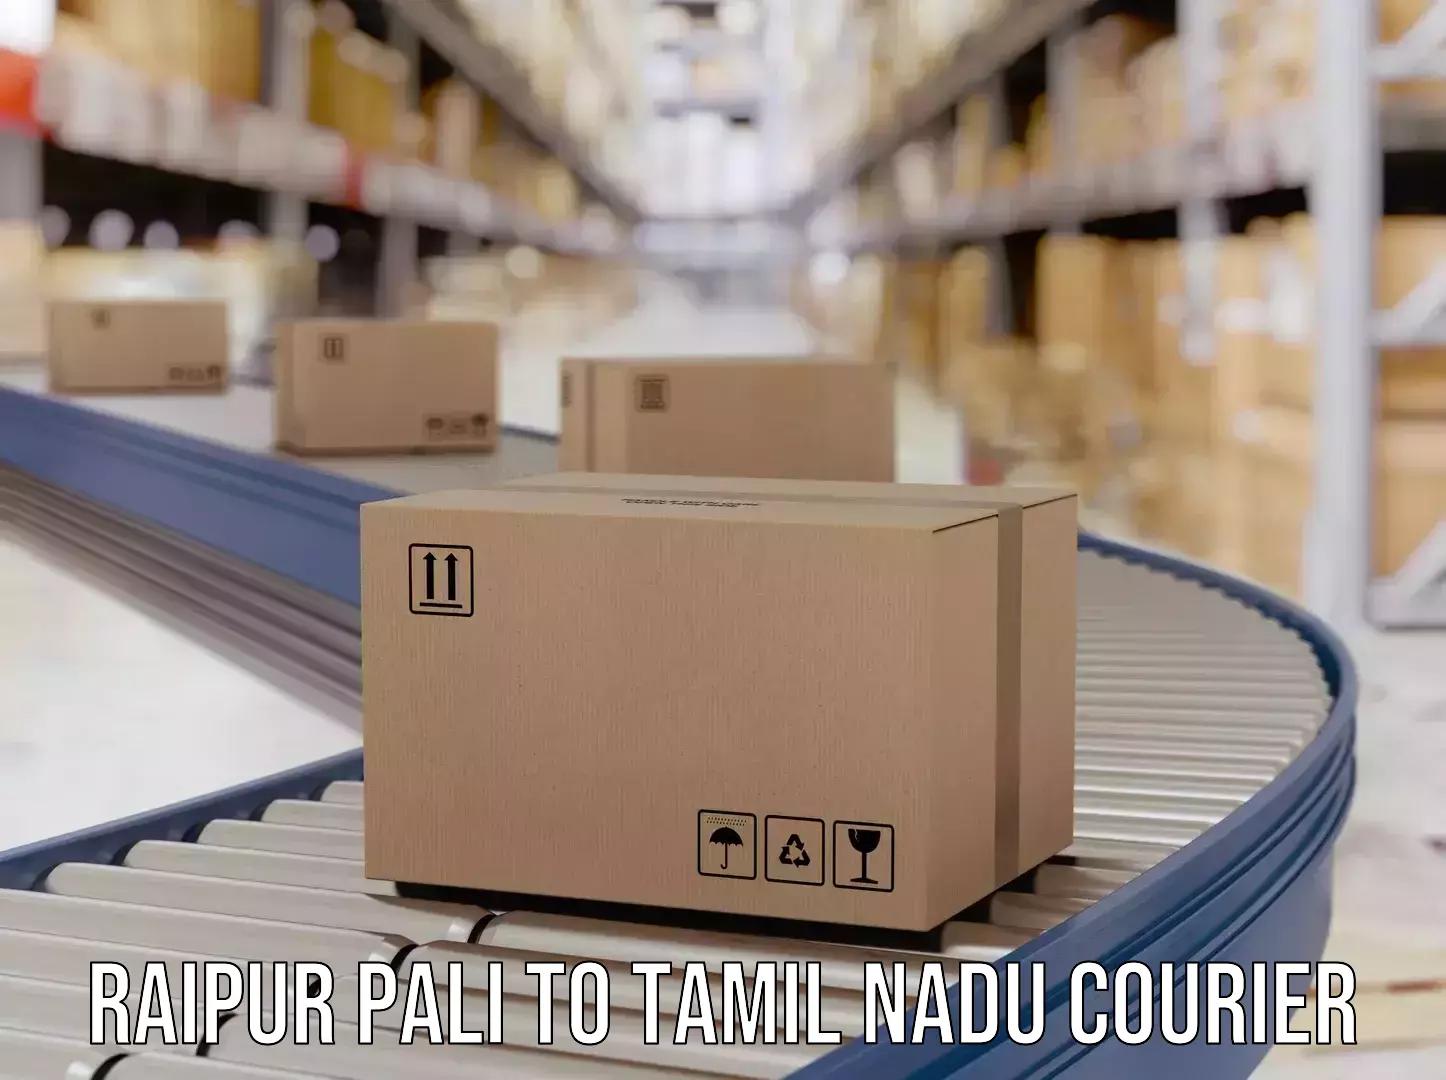 Cost-effective shipping solutions Raipur Pali to Ennore Port Chennai